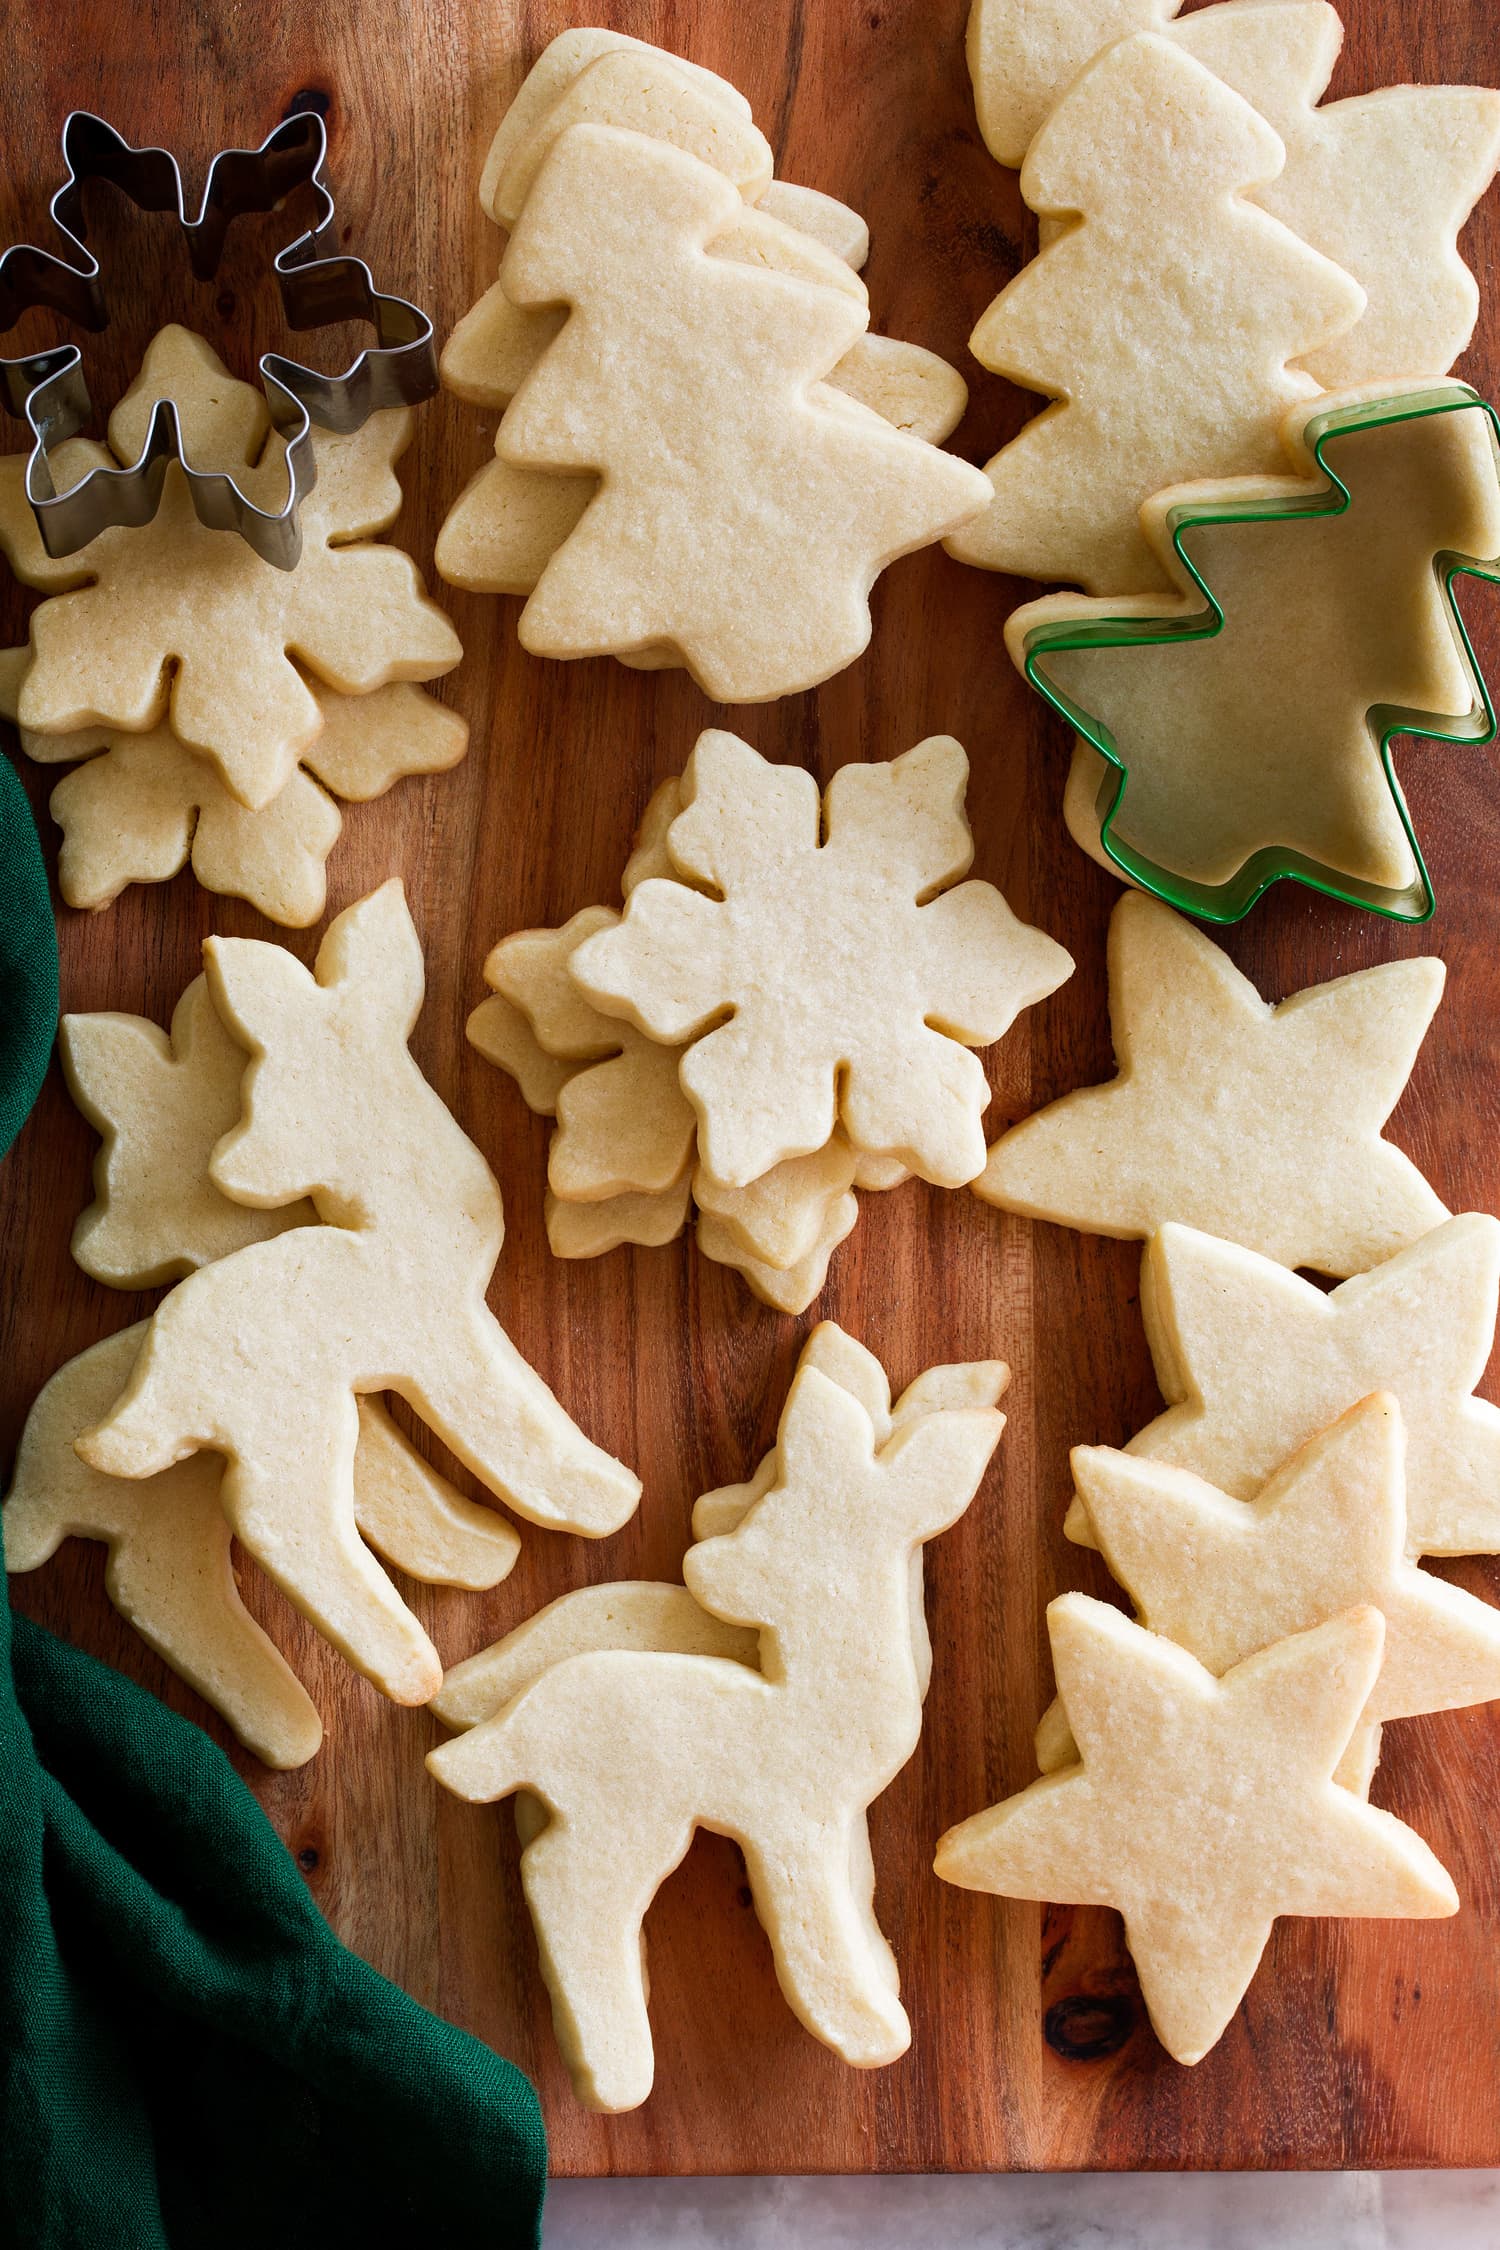 Baked cutout sugar cookies without icing shown on a wooden board with cookie cutters.